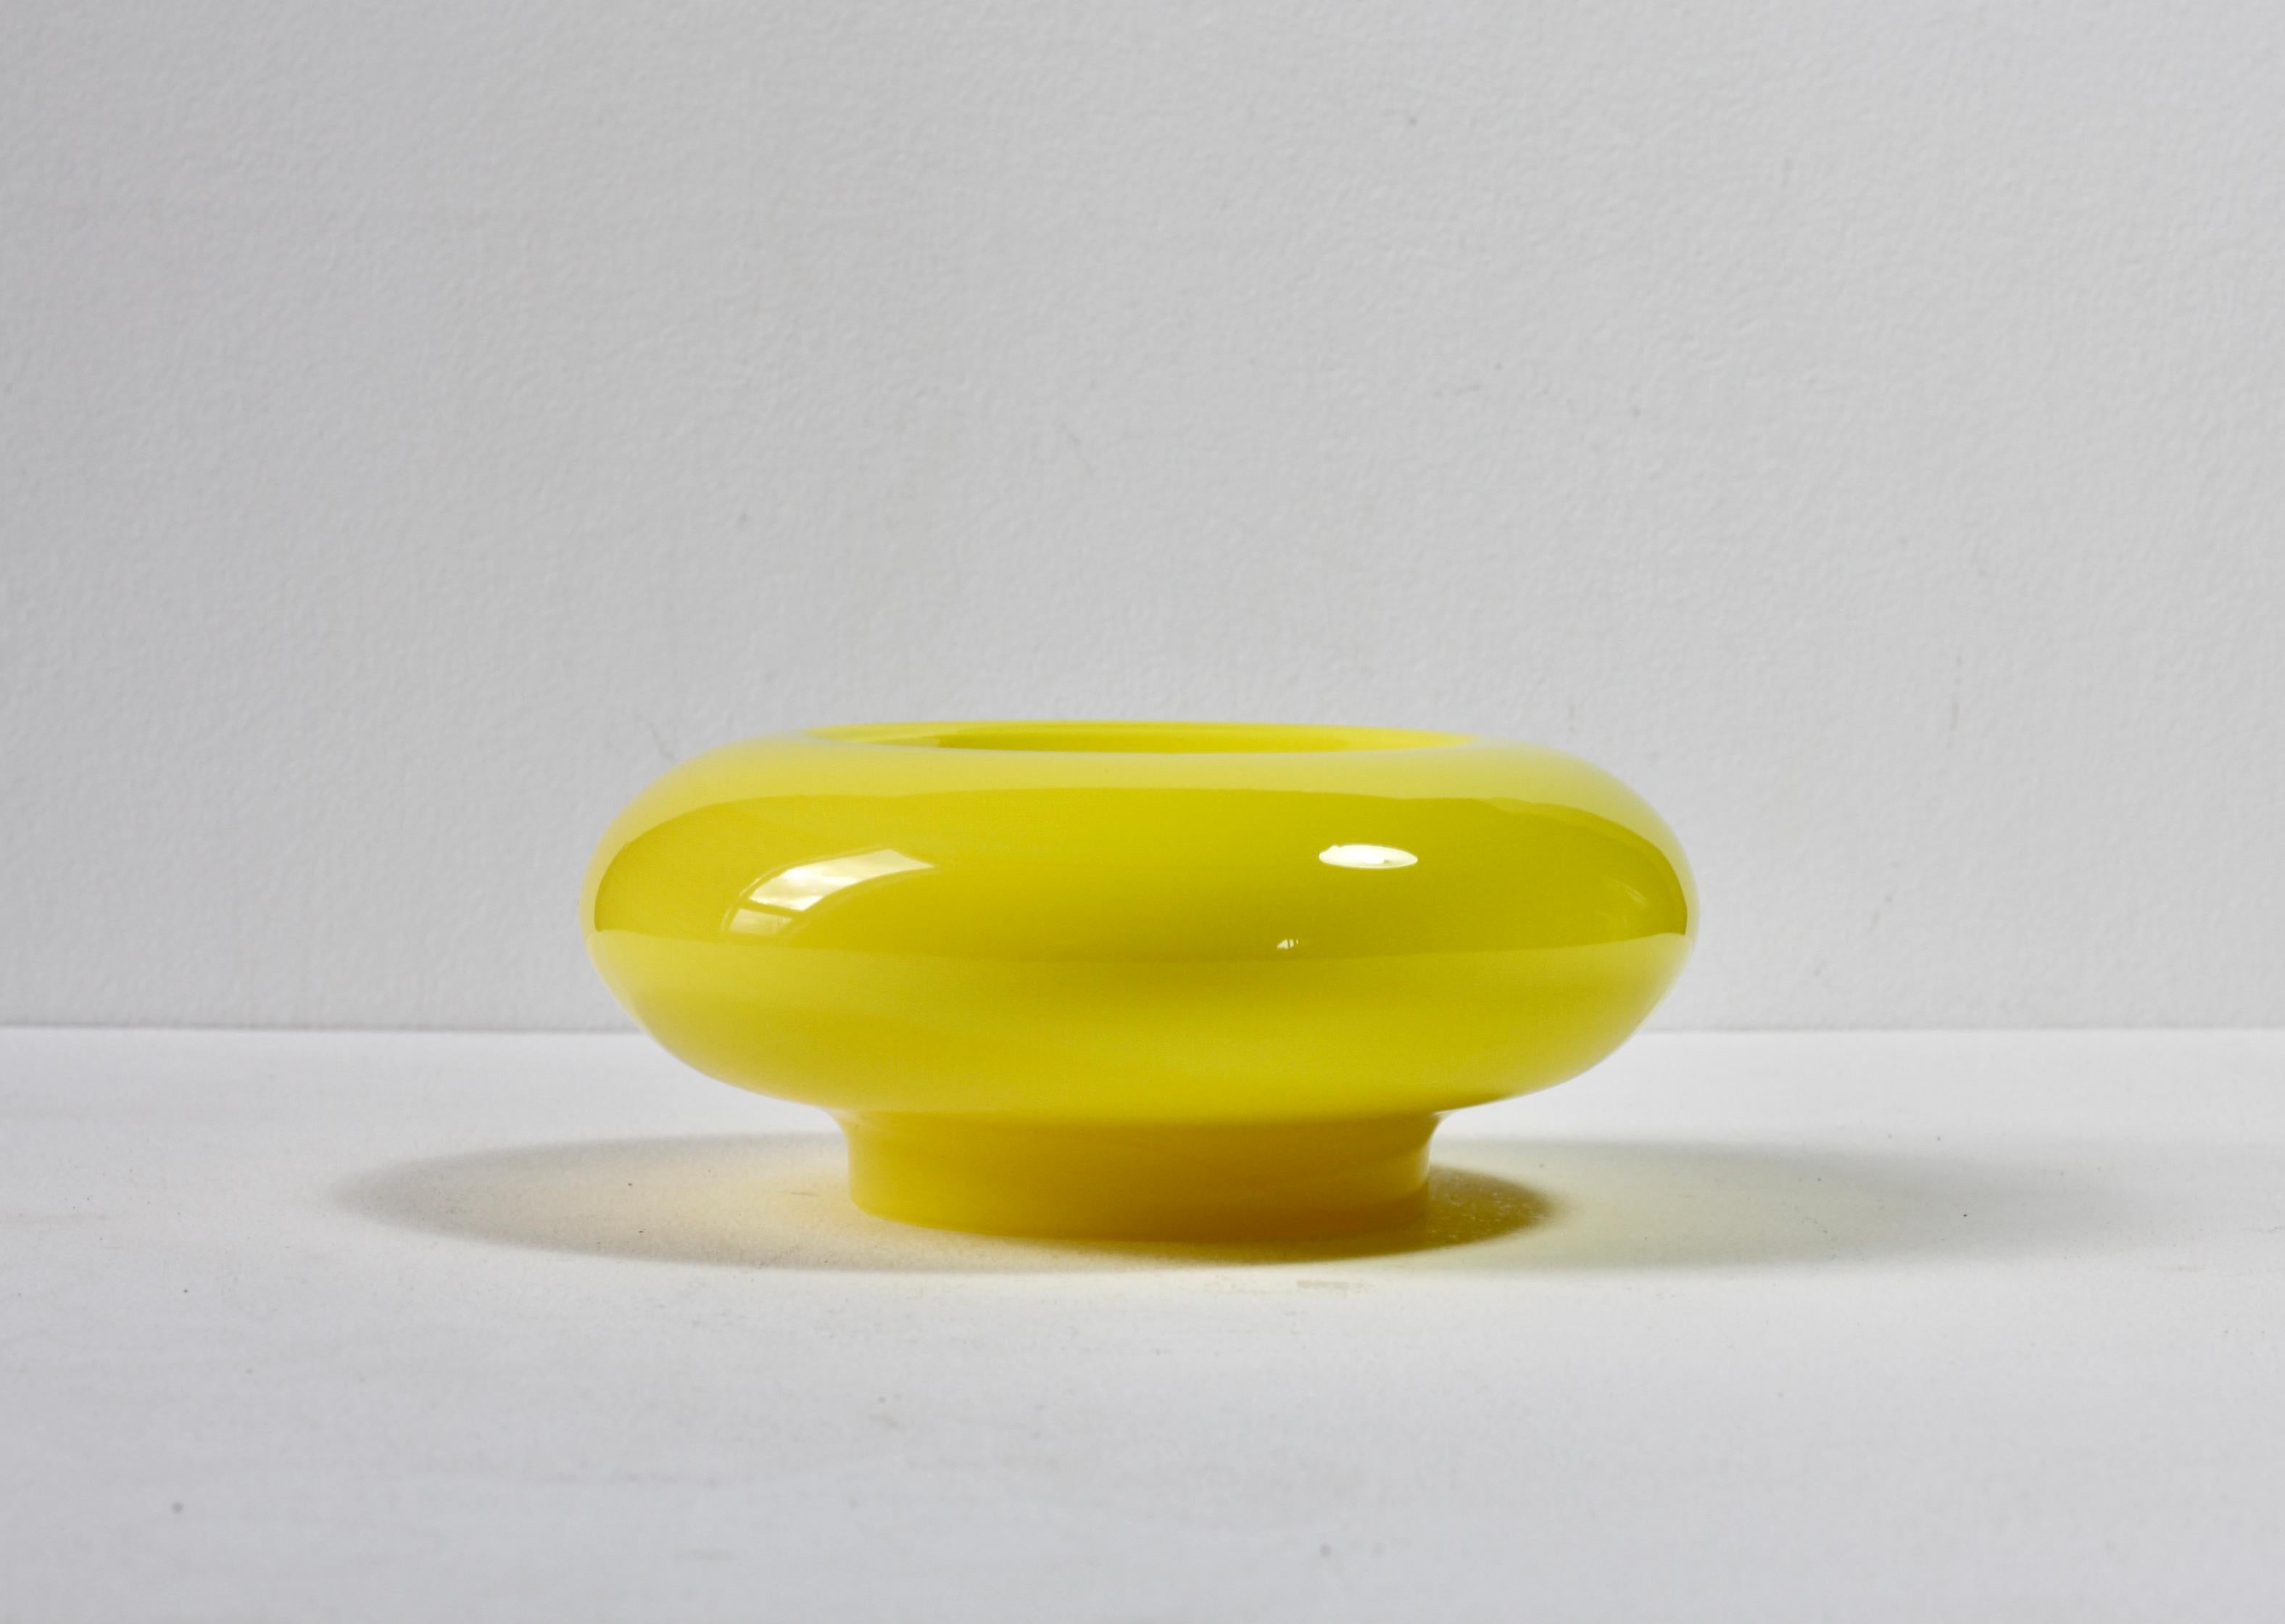 Wonderful vintage Mid-Century Modern glass bowl or vase in yellow attributed to Ermanno Nason for Cenedese of Murano, Italy. Yellow is one of the most difficult colours to produce and, therefore, hard to find.

This can be used as a bowl, dish,